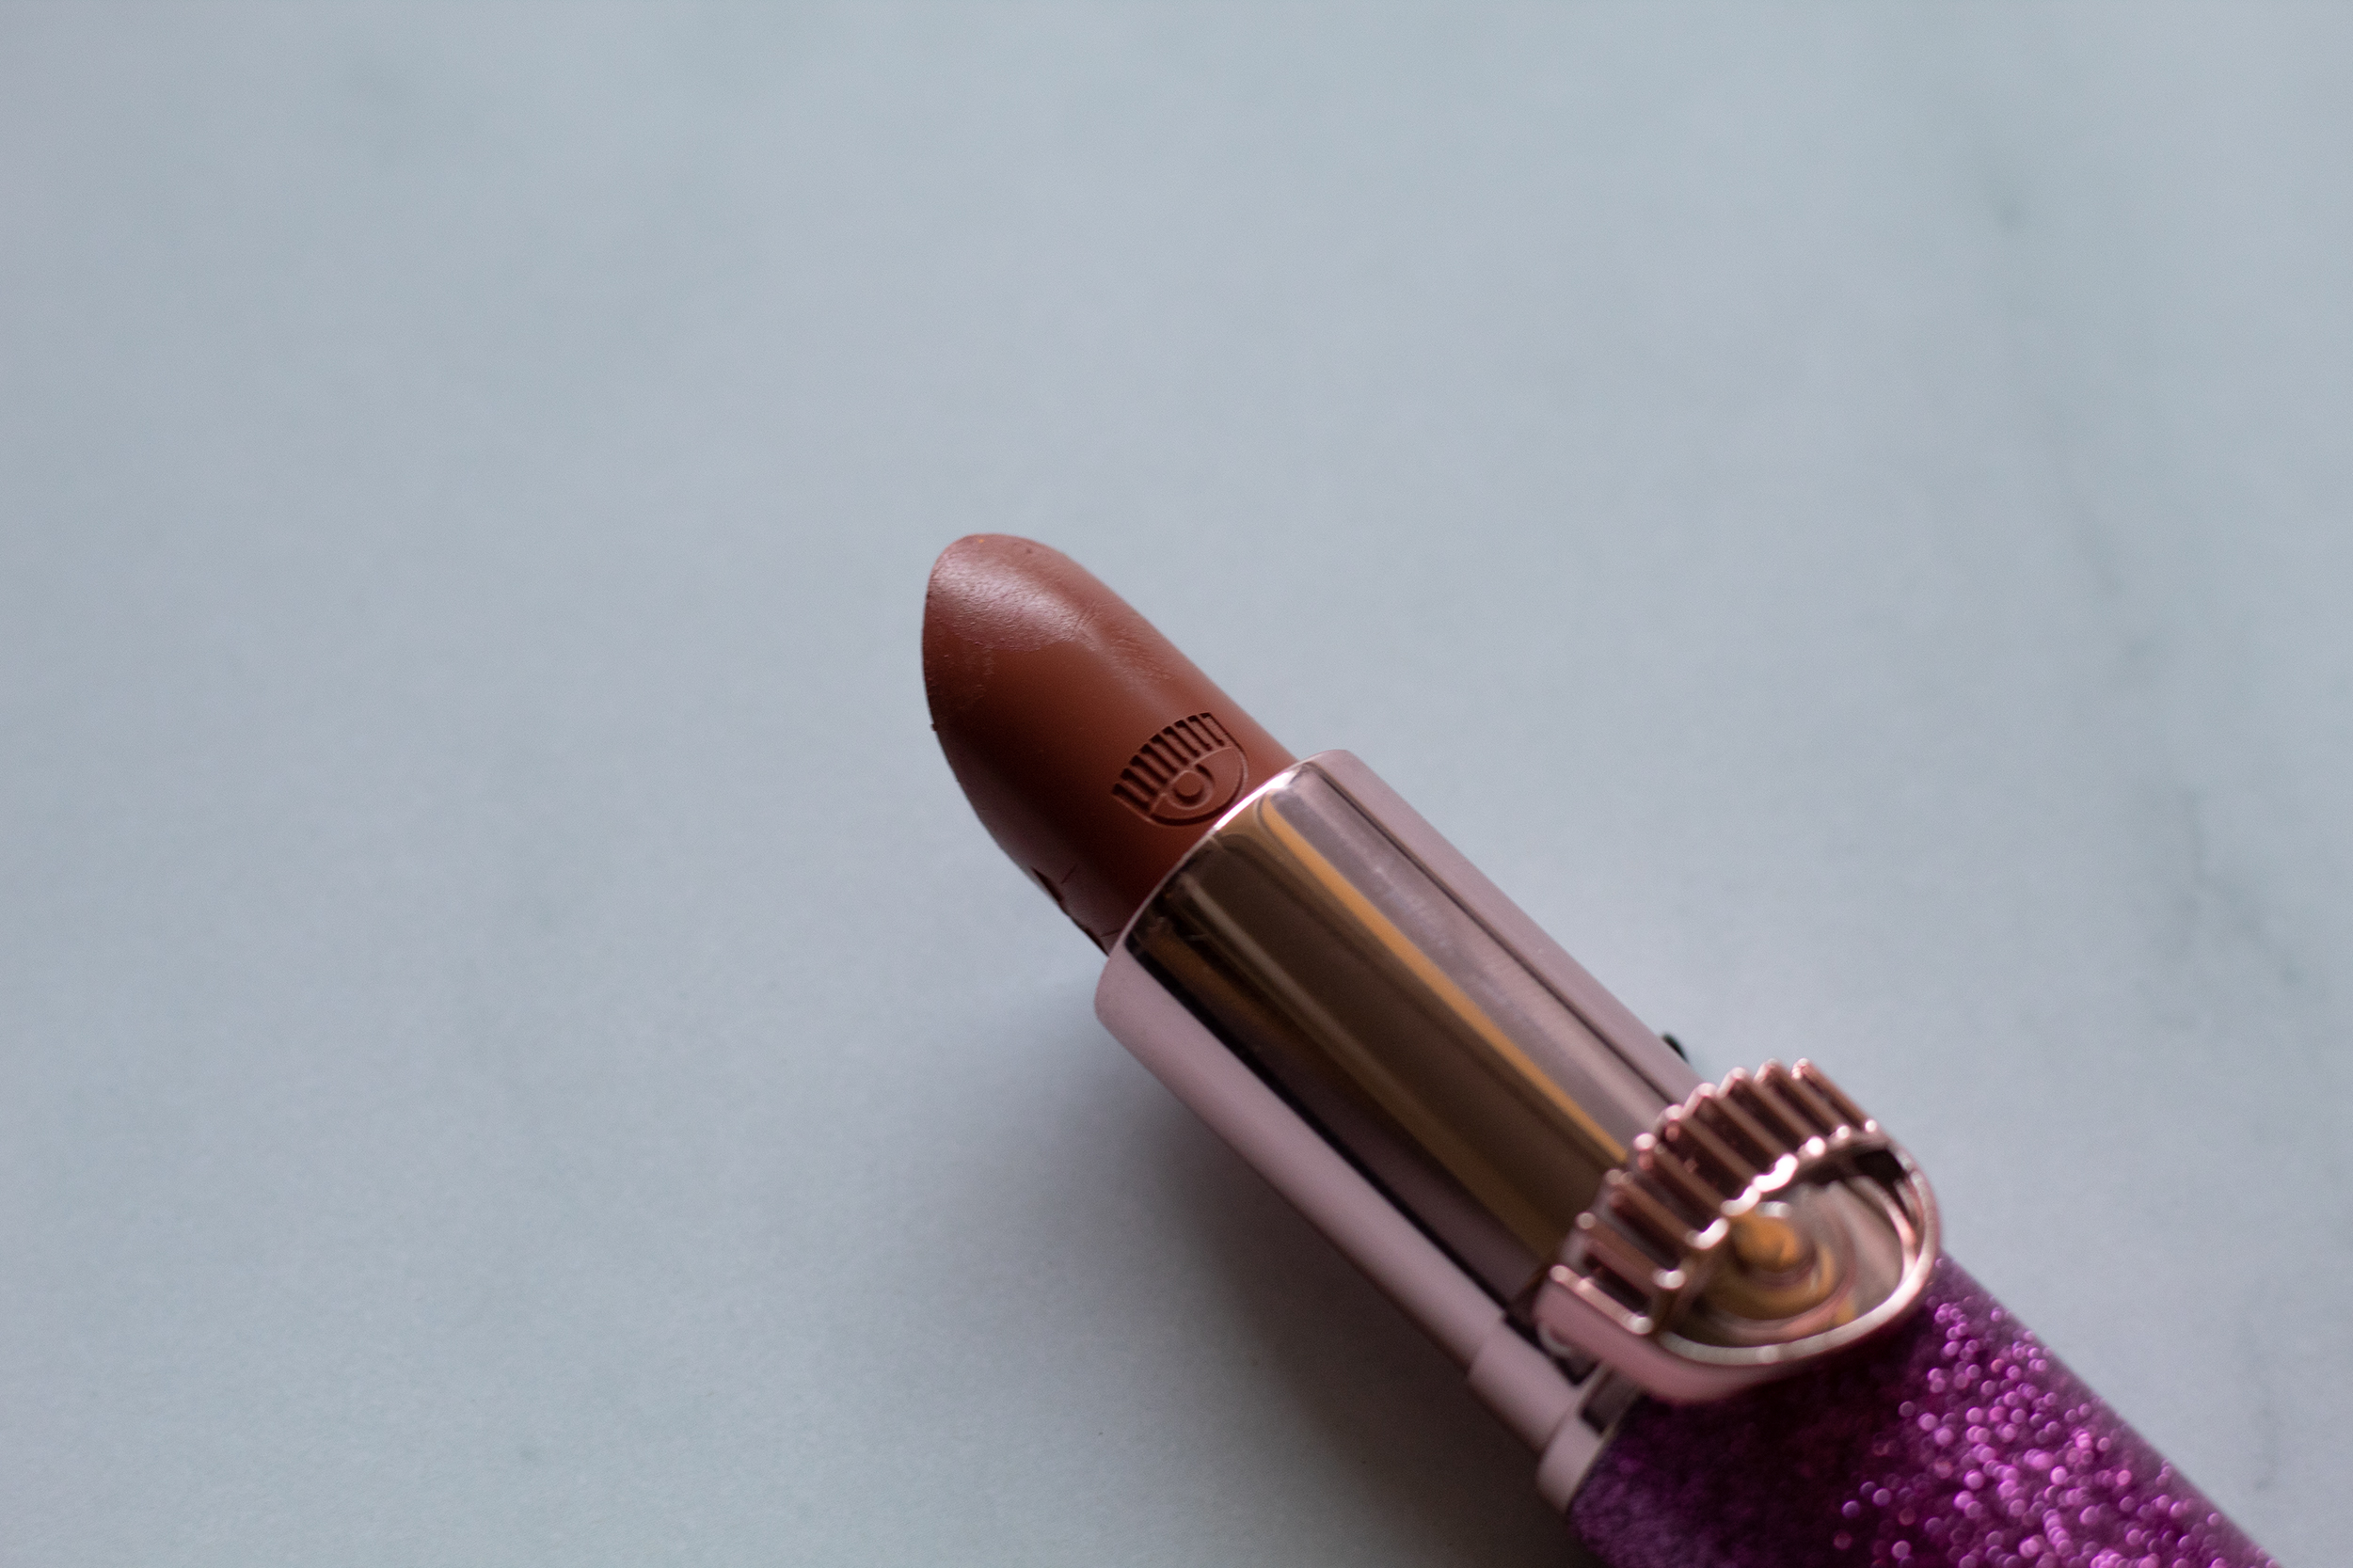 A lipstick in a purple sparkly and gold tube that is open to show a brown rose hue against white marble background